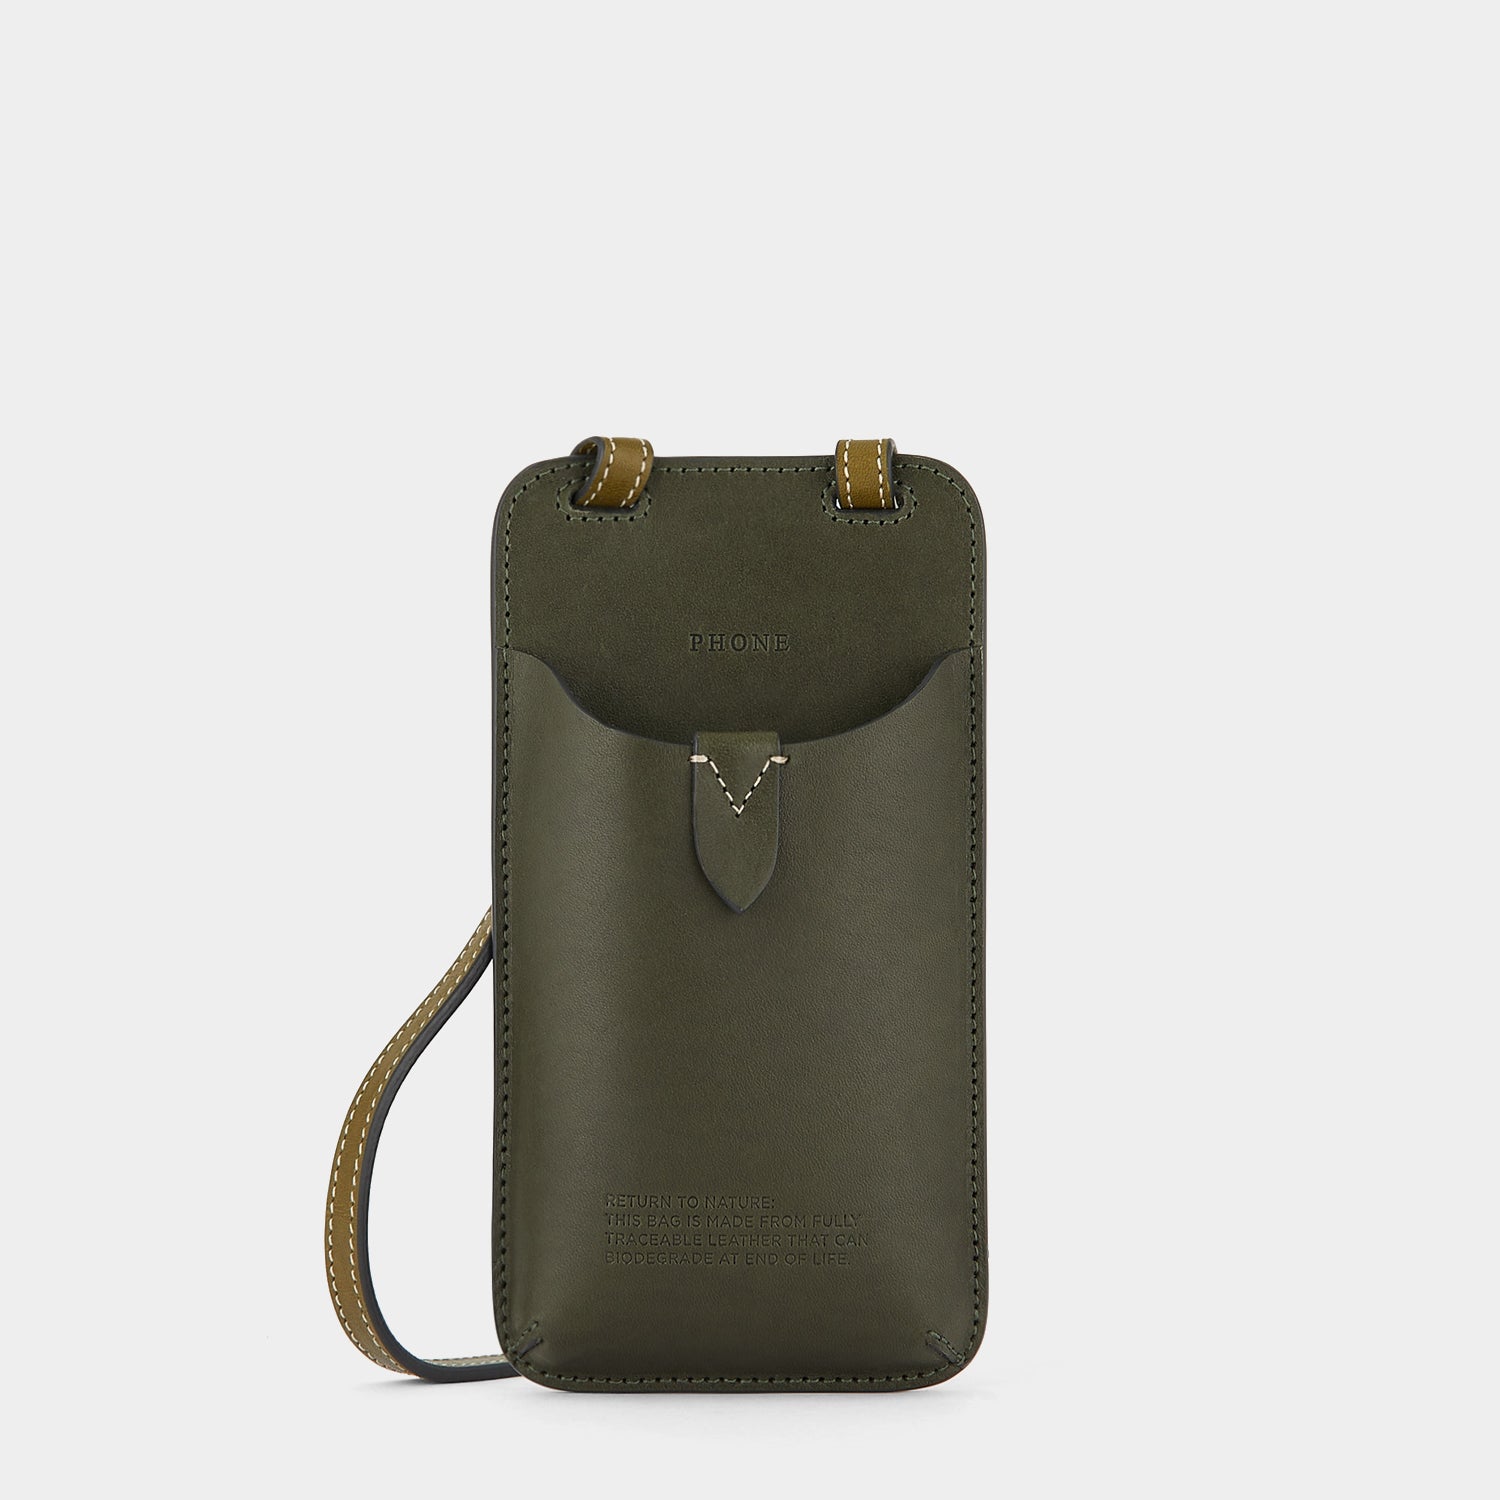 Return to Nature Phone Pouch on Strap -

                  
                    Compostable Leather in Dark Olive -
                  

                  Anya Hindmarch UK
